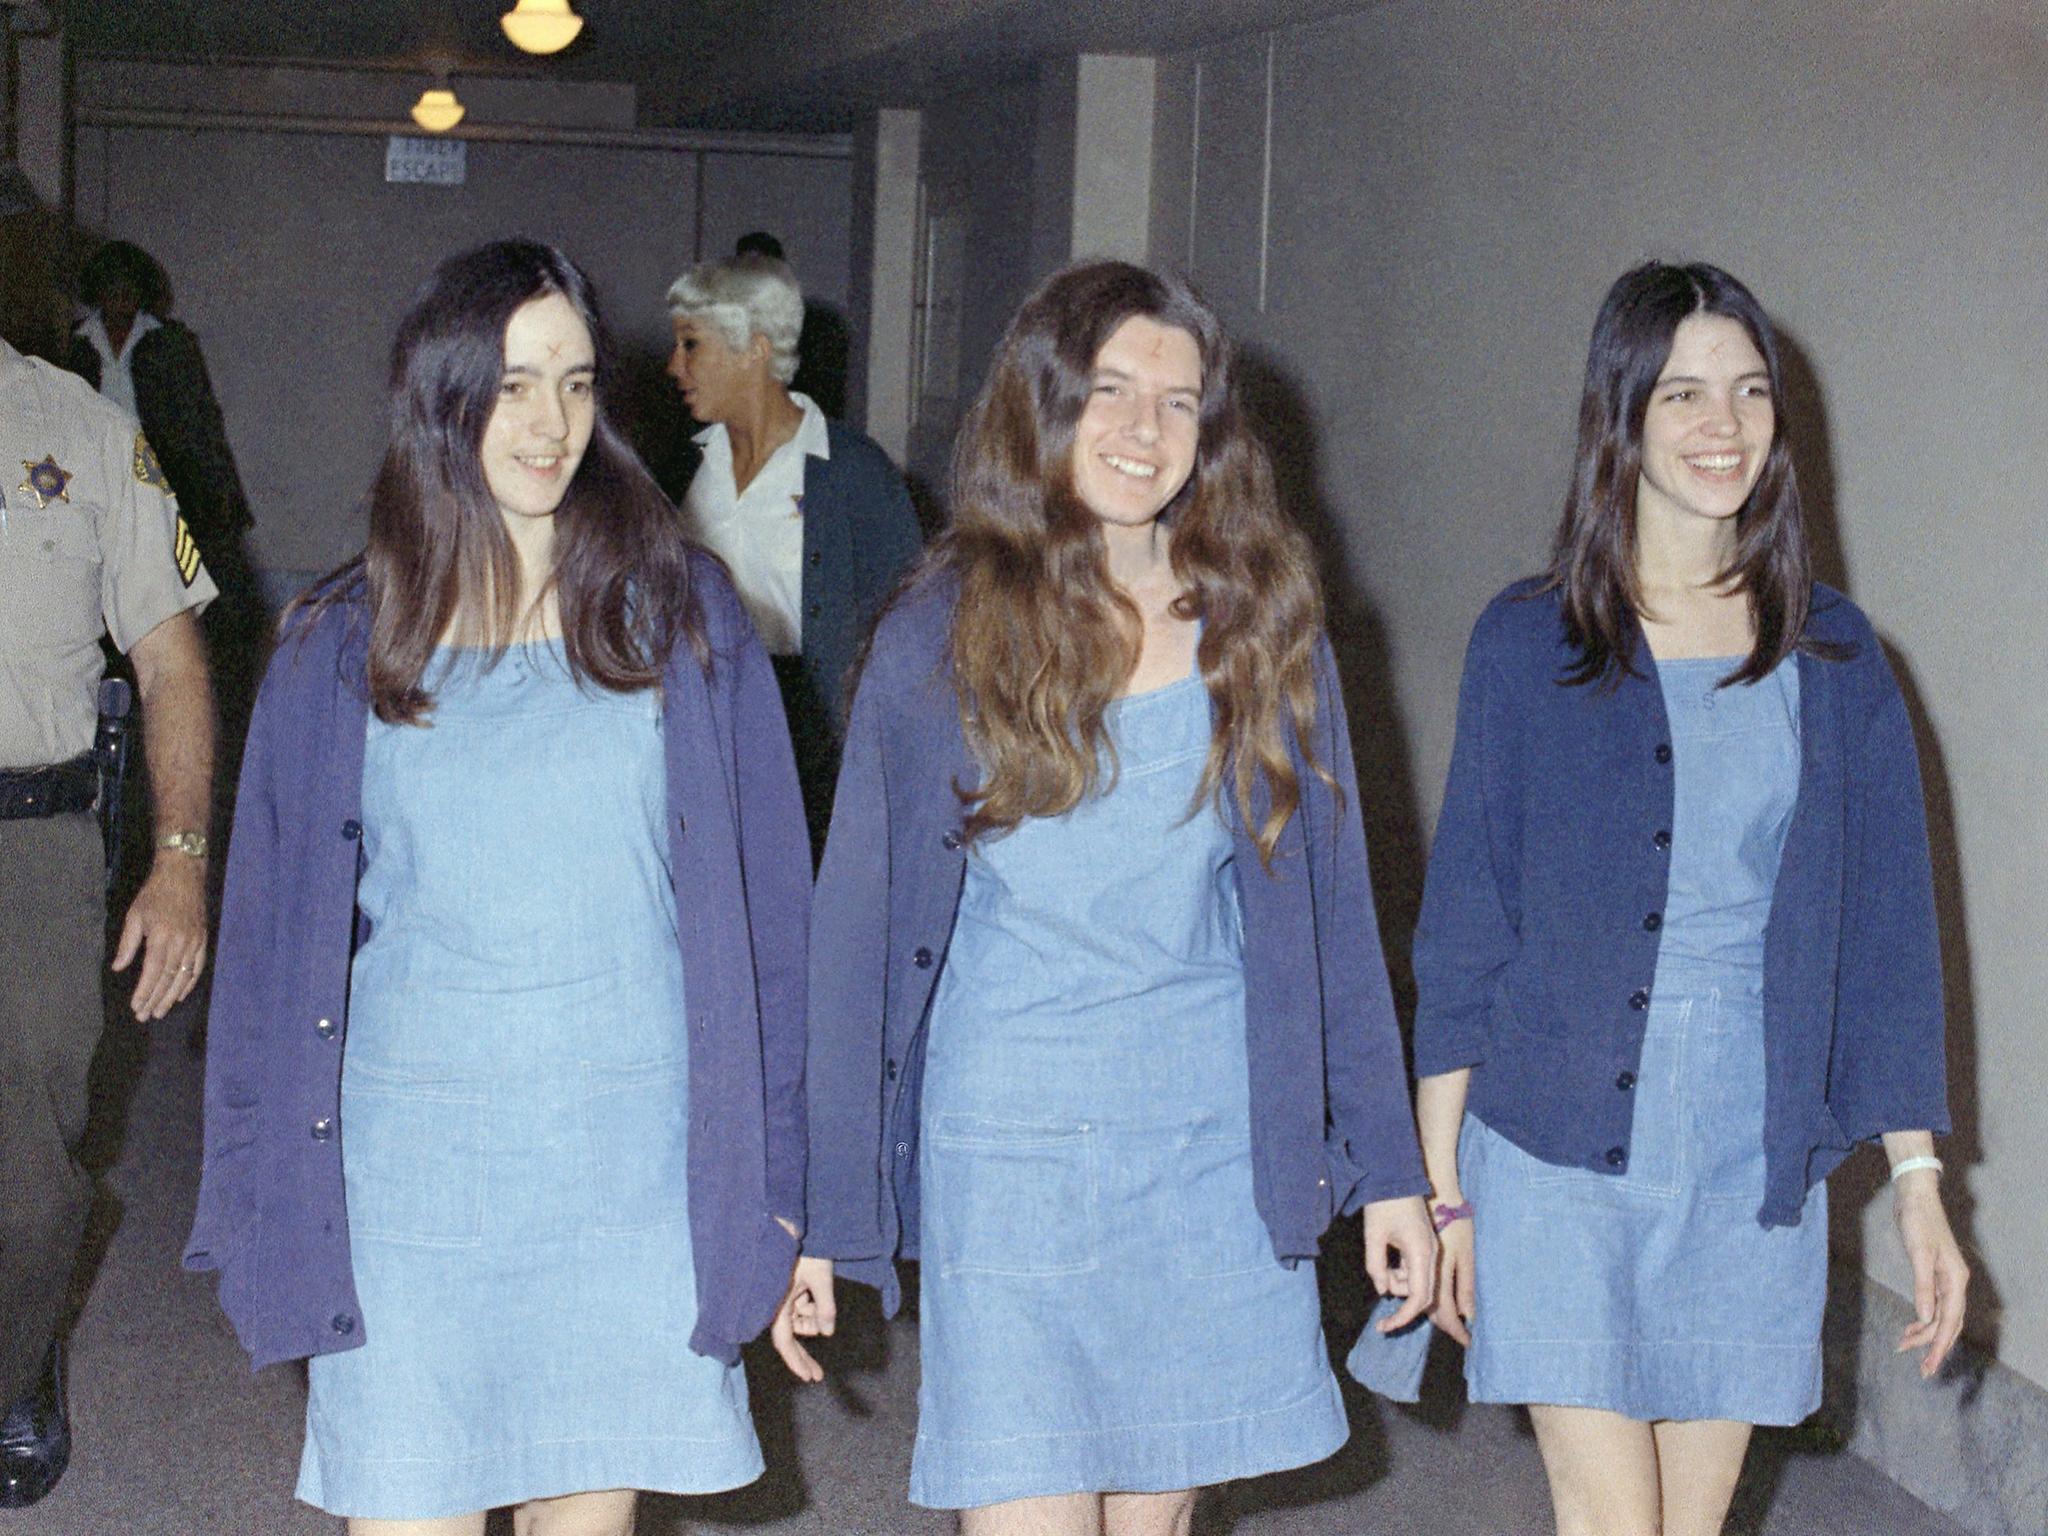 Susan Atkins, Patricia Krenwinkel and Leslie Van Houten, walk to court to appear for their roles in the 1969 cult killings of seven people, including pregnant actress Sharon Tate, in Los Angeles